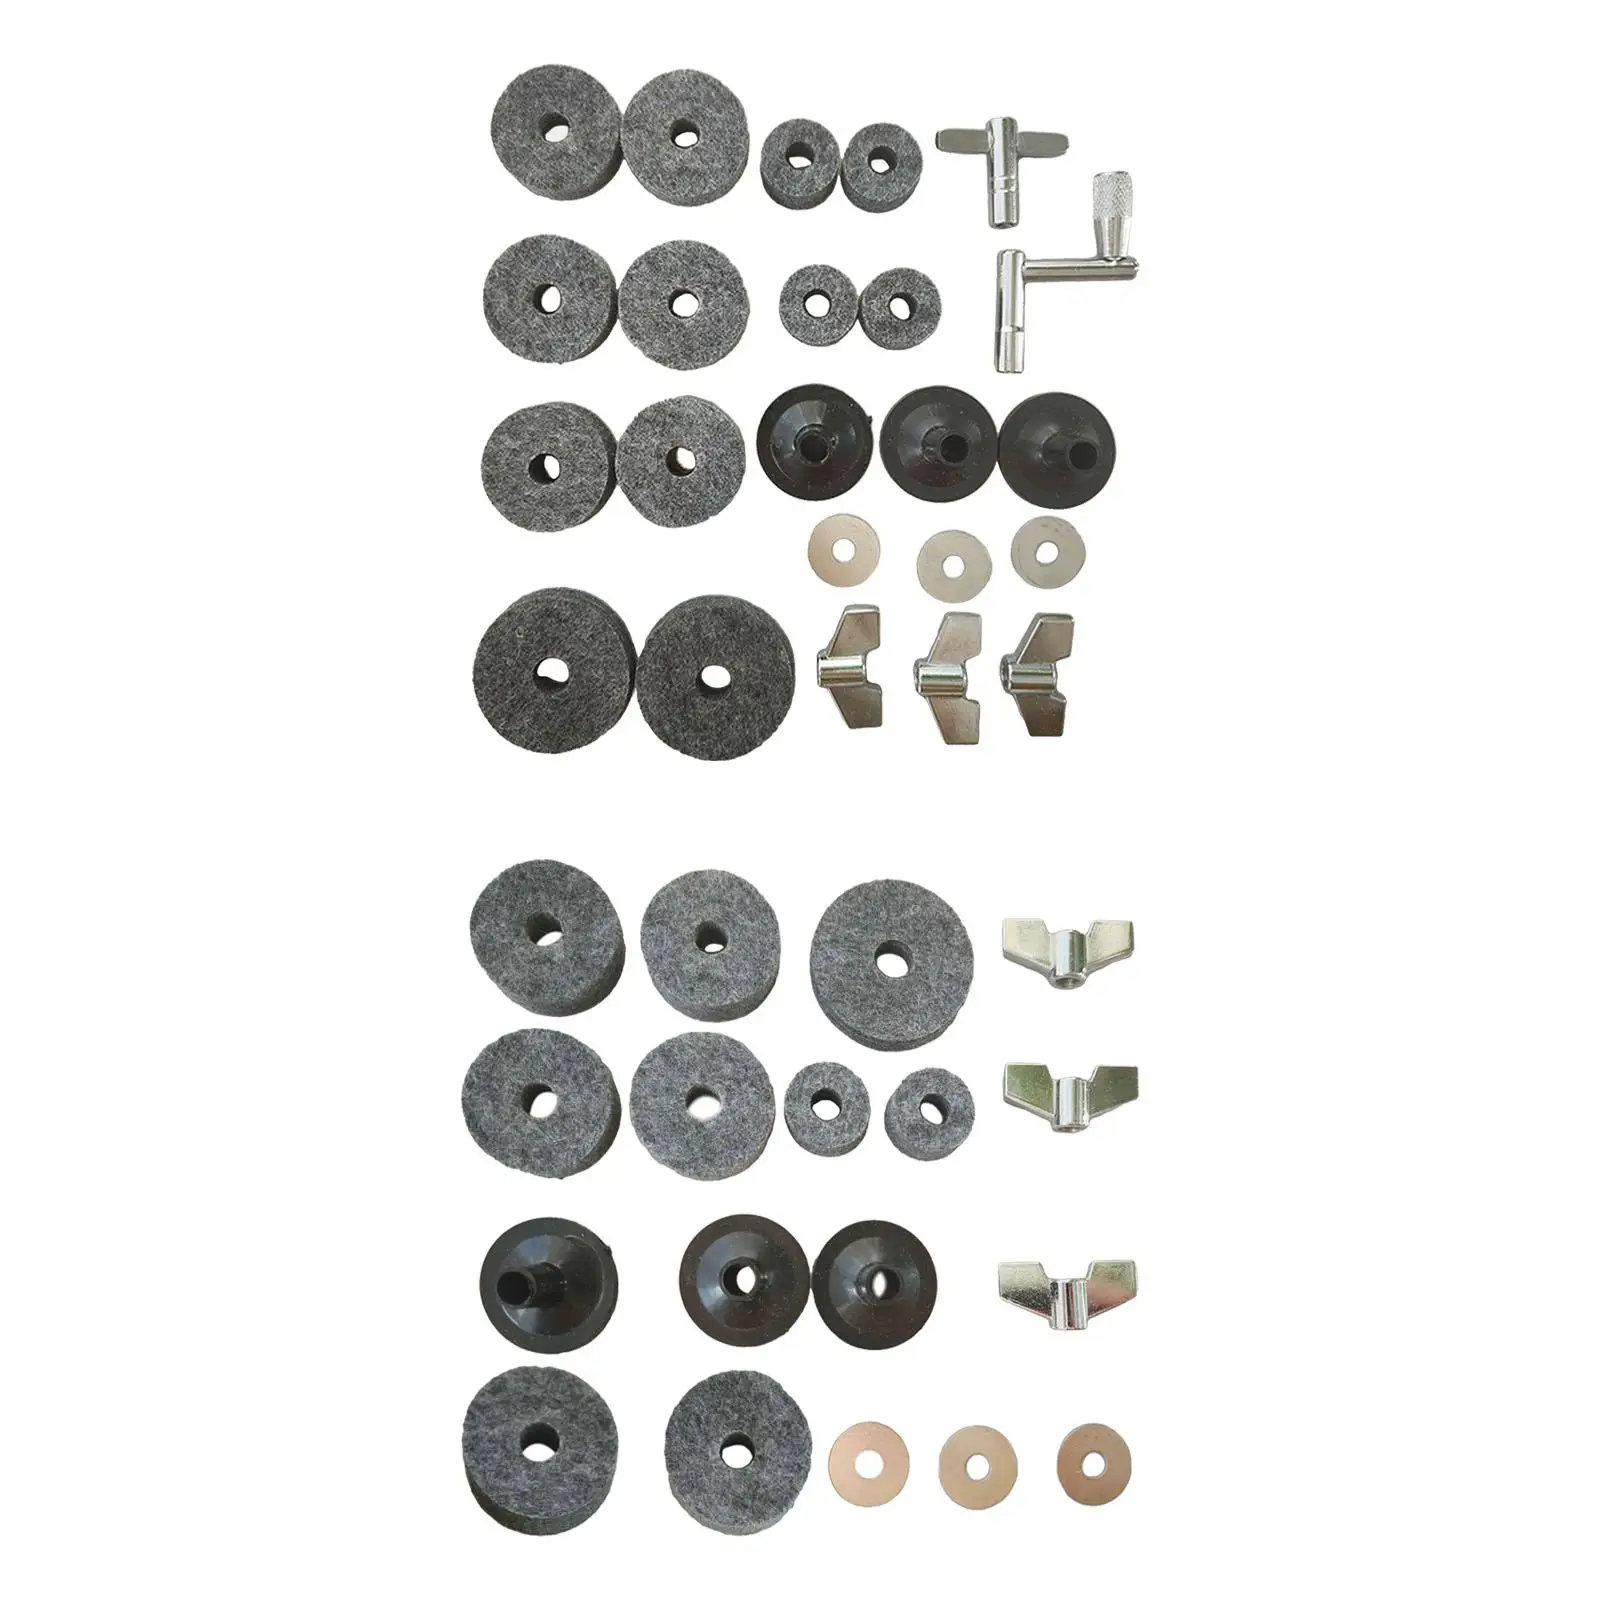 Drum Replacement Parts Cymbal Felts Kits Wing Nuts Felts Drum Keys Durable Lightweight Cymbal Washer Hi Hat Clutch Felt